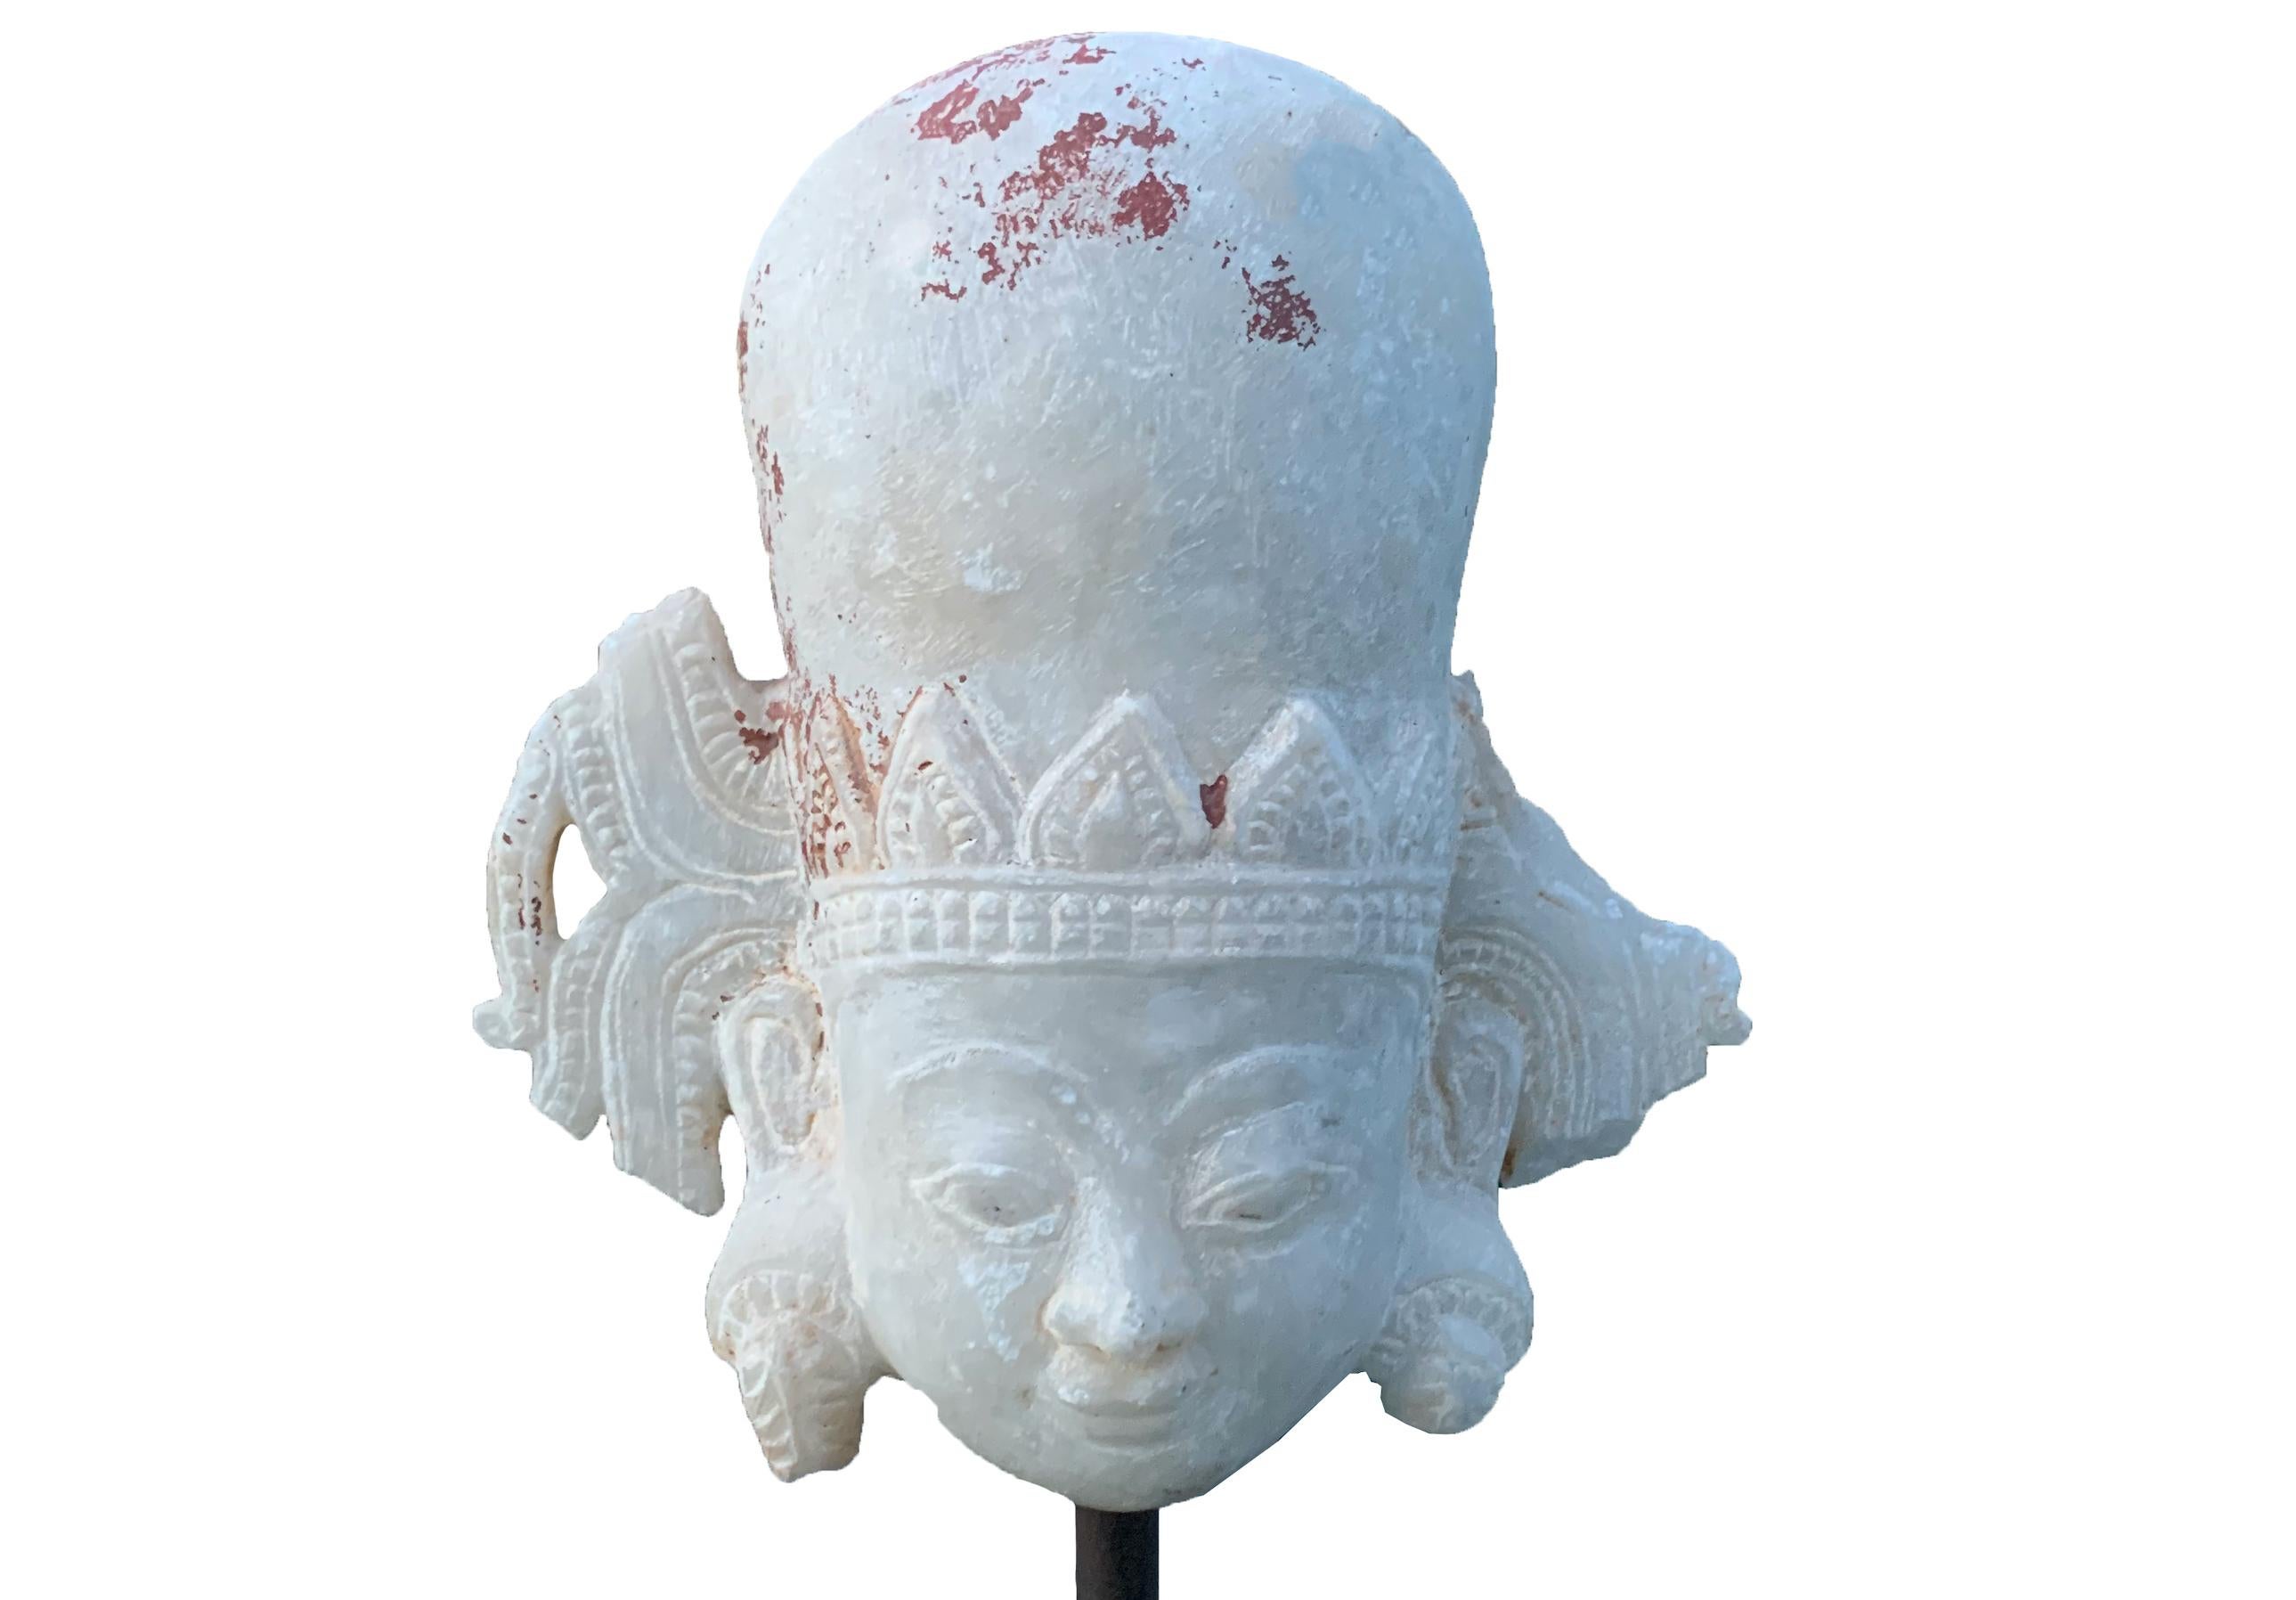 This small marble head of the Buddha is from the Shan States of Burma and carved from white marble. The face is framed by elongated and intricately carved ears. There are faint signs of the original burgundy and black lacquer which has almost